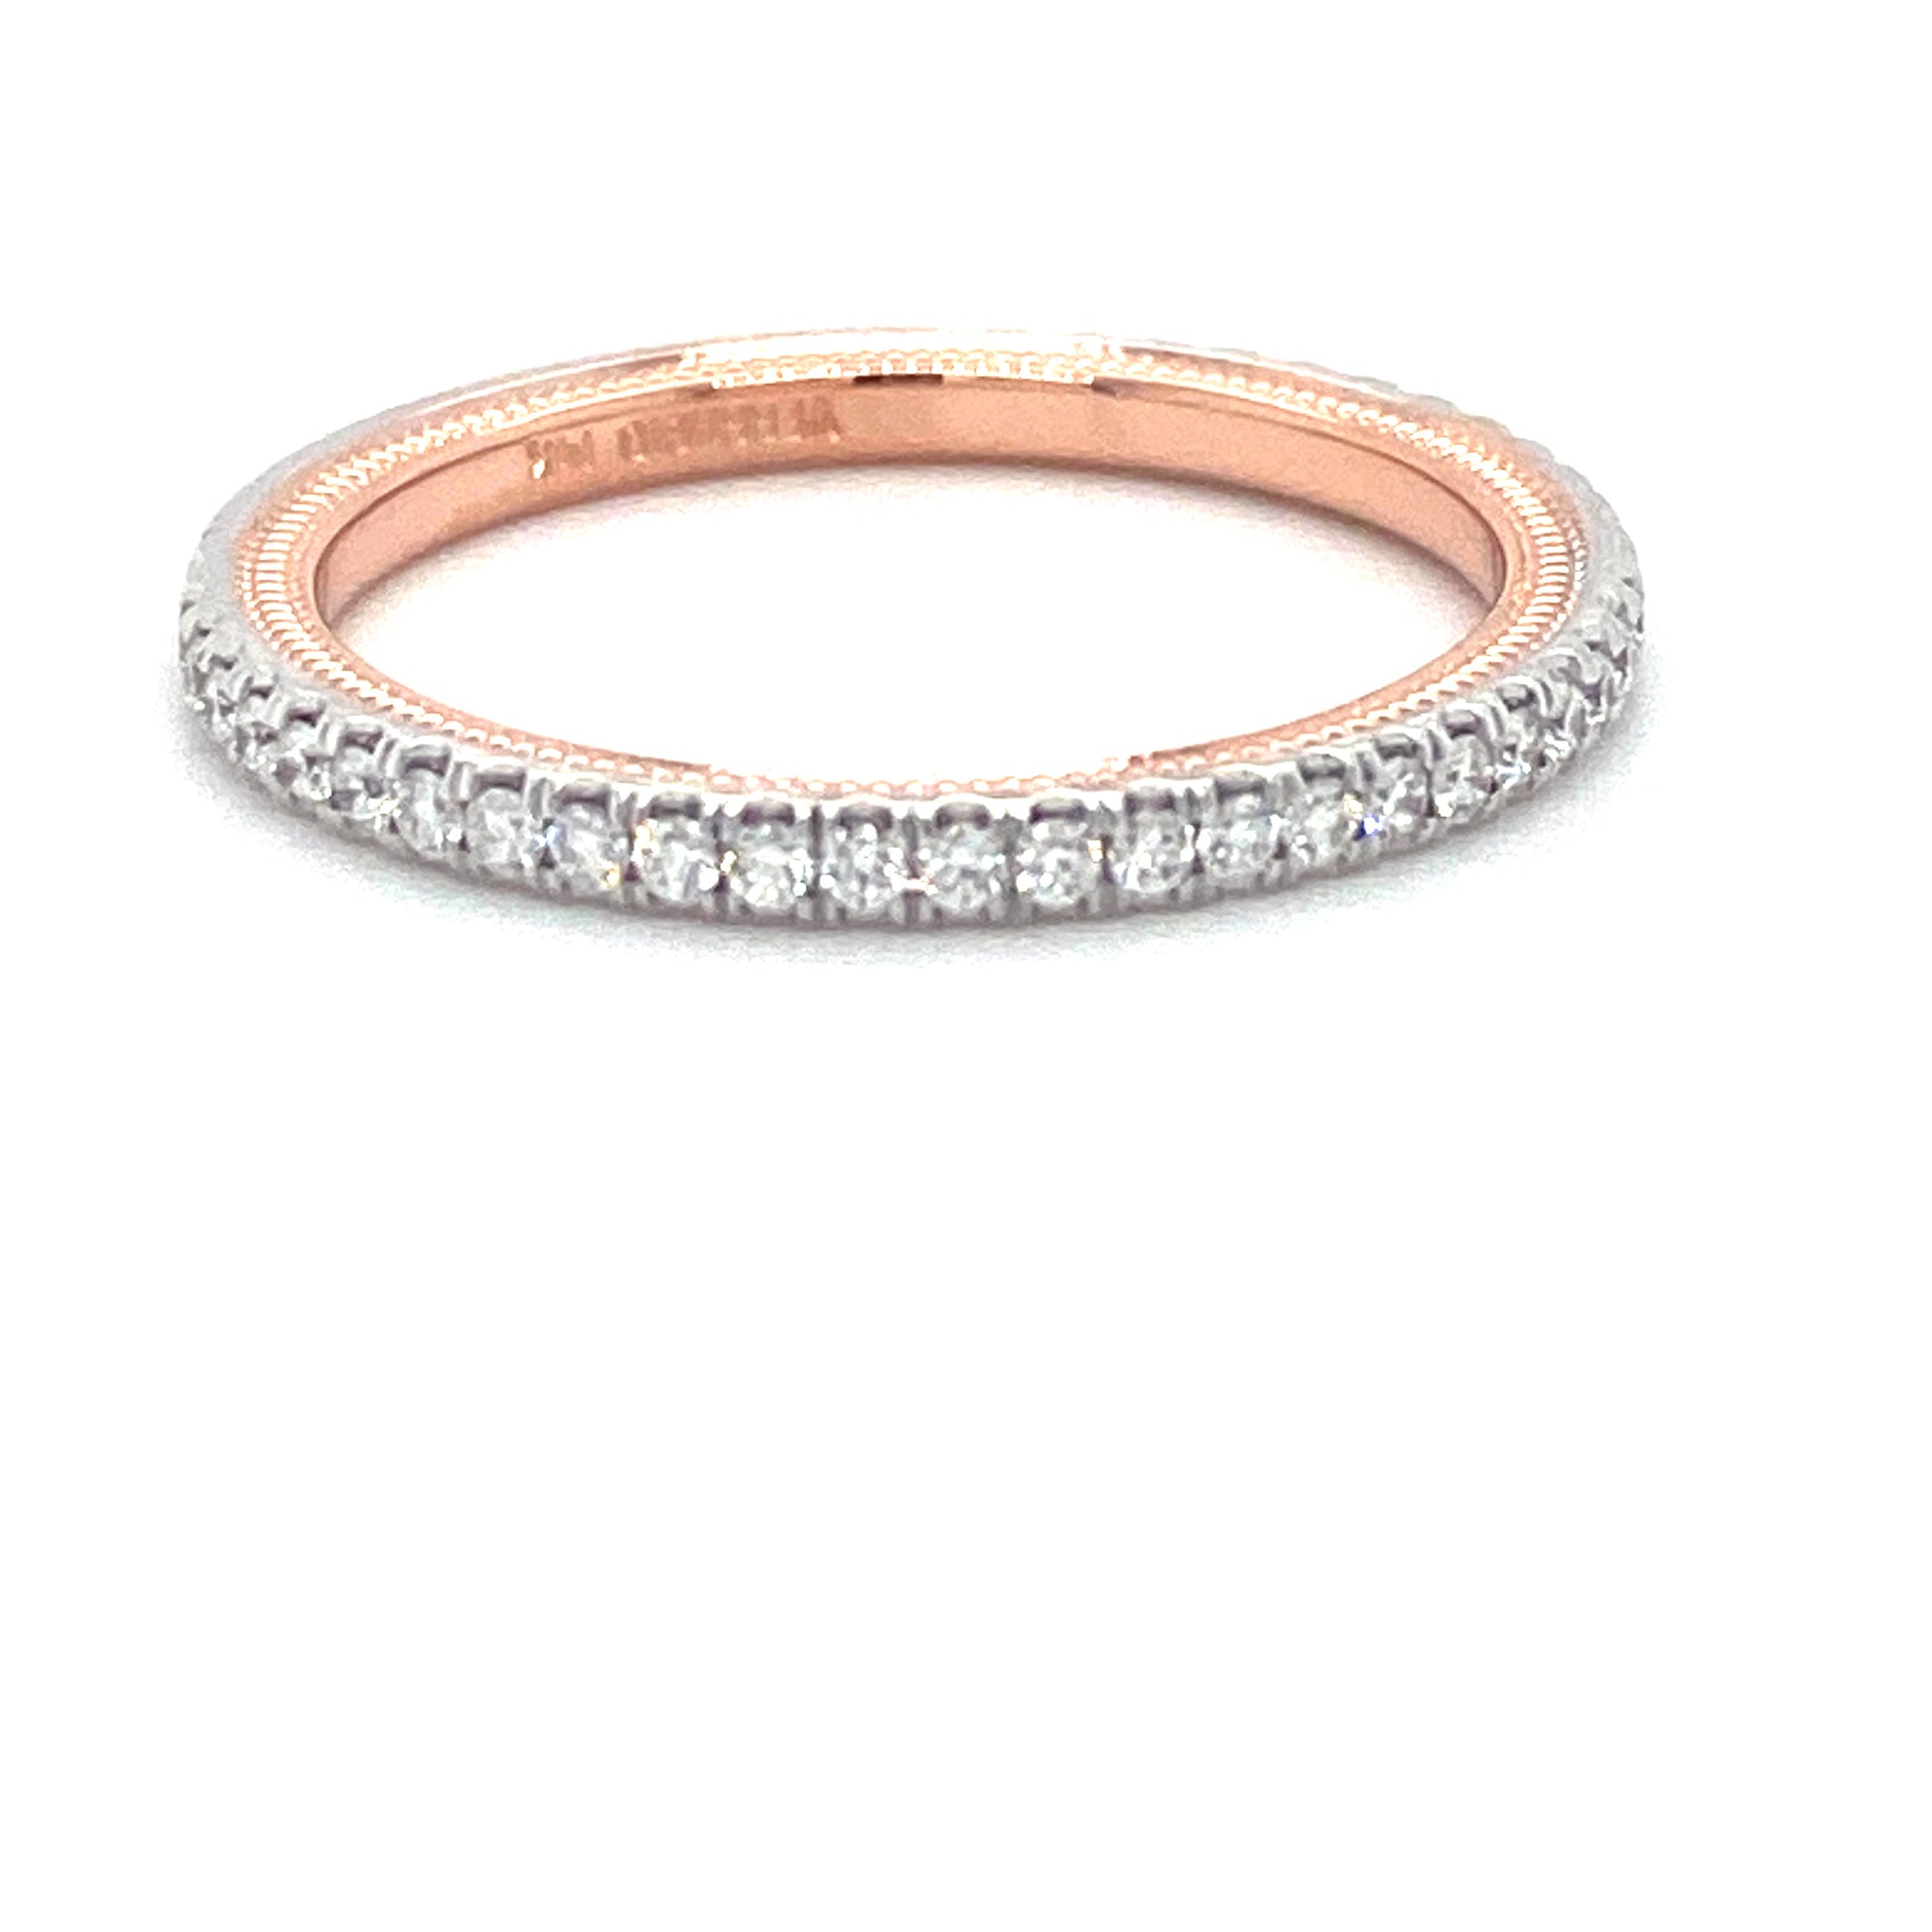 Verragio Tradition Collection White And Rose Gold Diamond Wedding Band - Diamond Wedding Bands - Women's